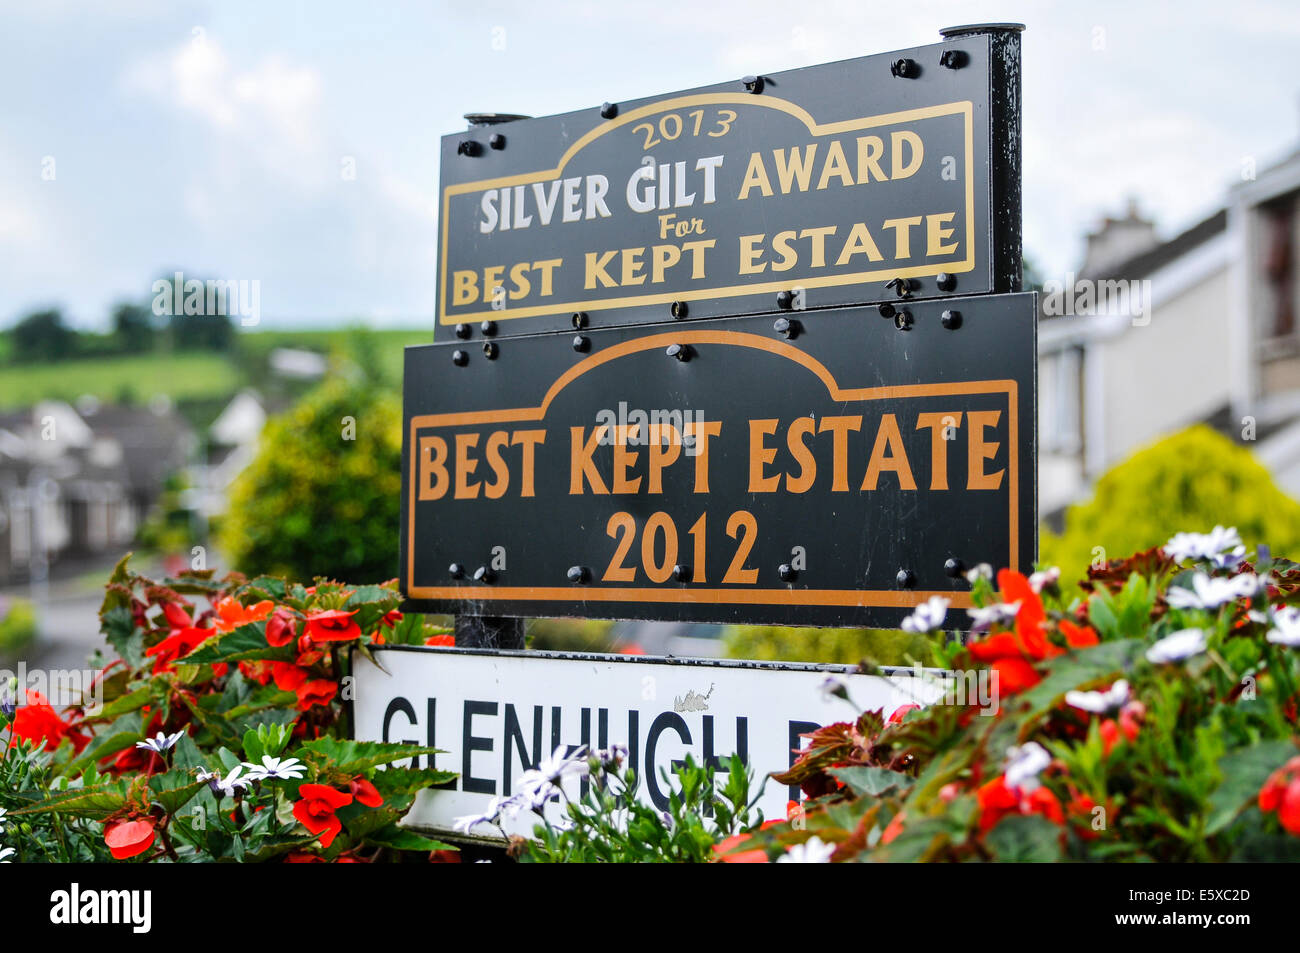 Ballymena, Northern Ireland. 7th Aug 2014 - Sign for the 'Best Kept Estate 2012' and 'Silver Gilt Award for Best Kept Estate' Credit:  Stephen Barnes/Alamy Live News Stock Photo